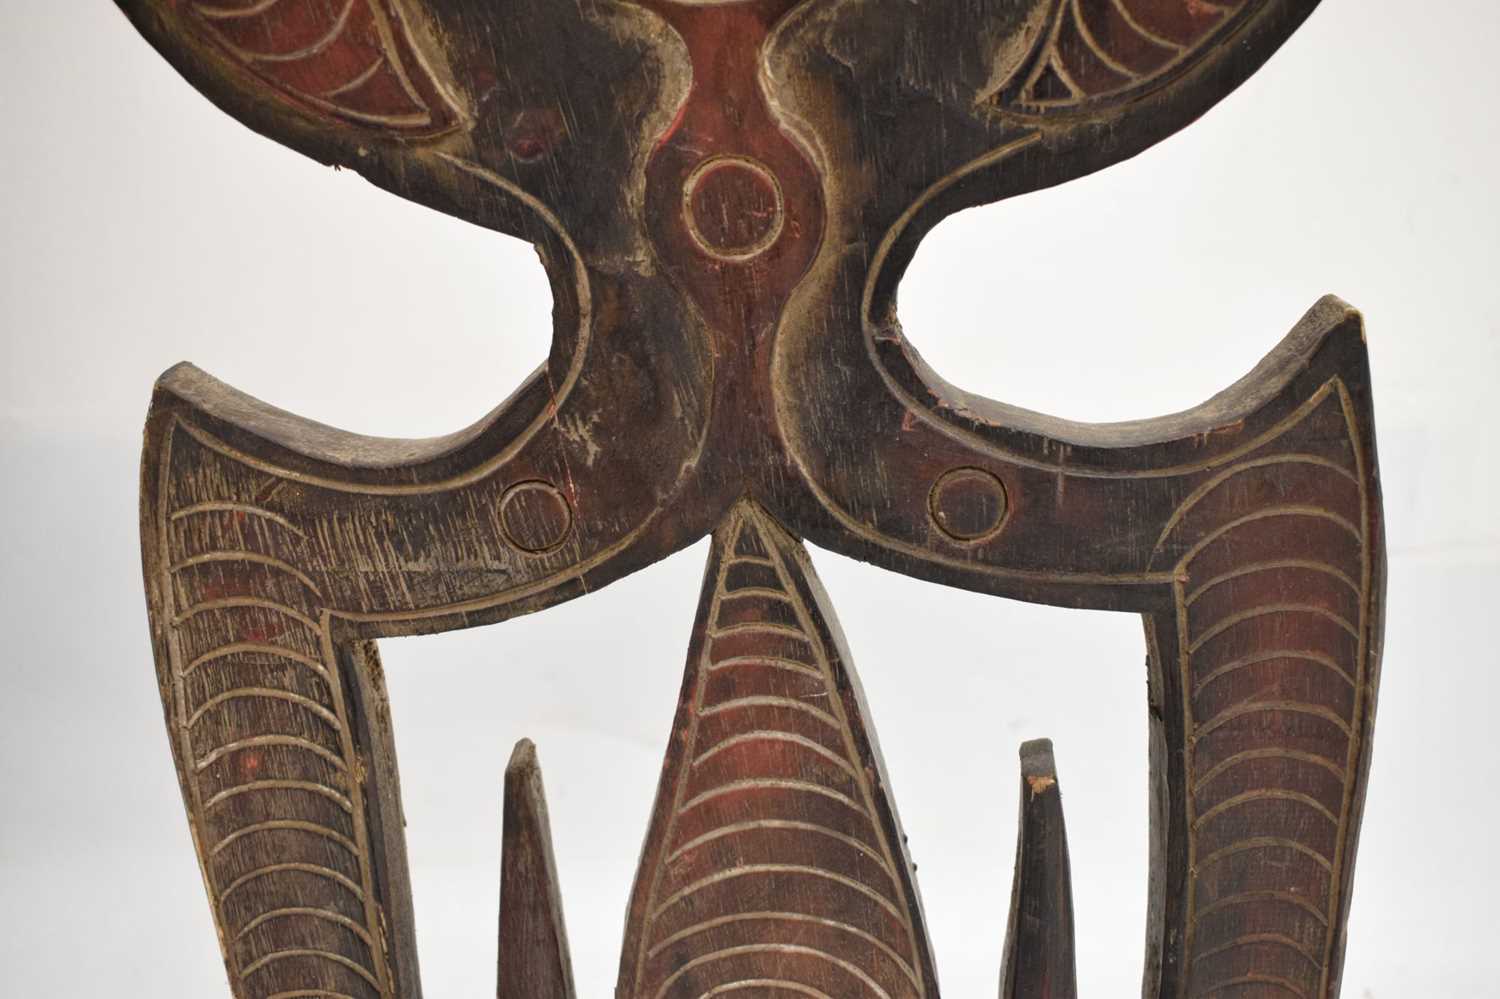 Ethnographica - Carved wooden skull hook / hanger or 'Agiba', Kerewa people, Papua New Guinea - Image 5 of 17